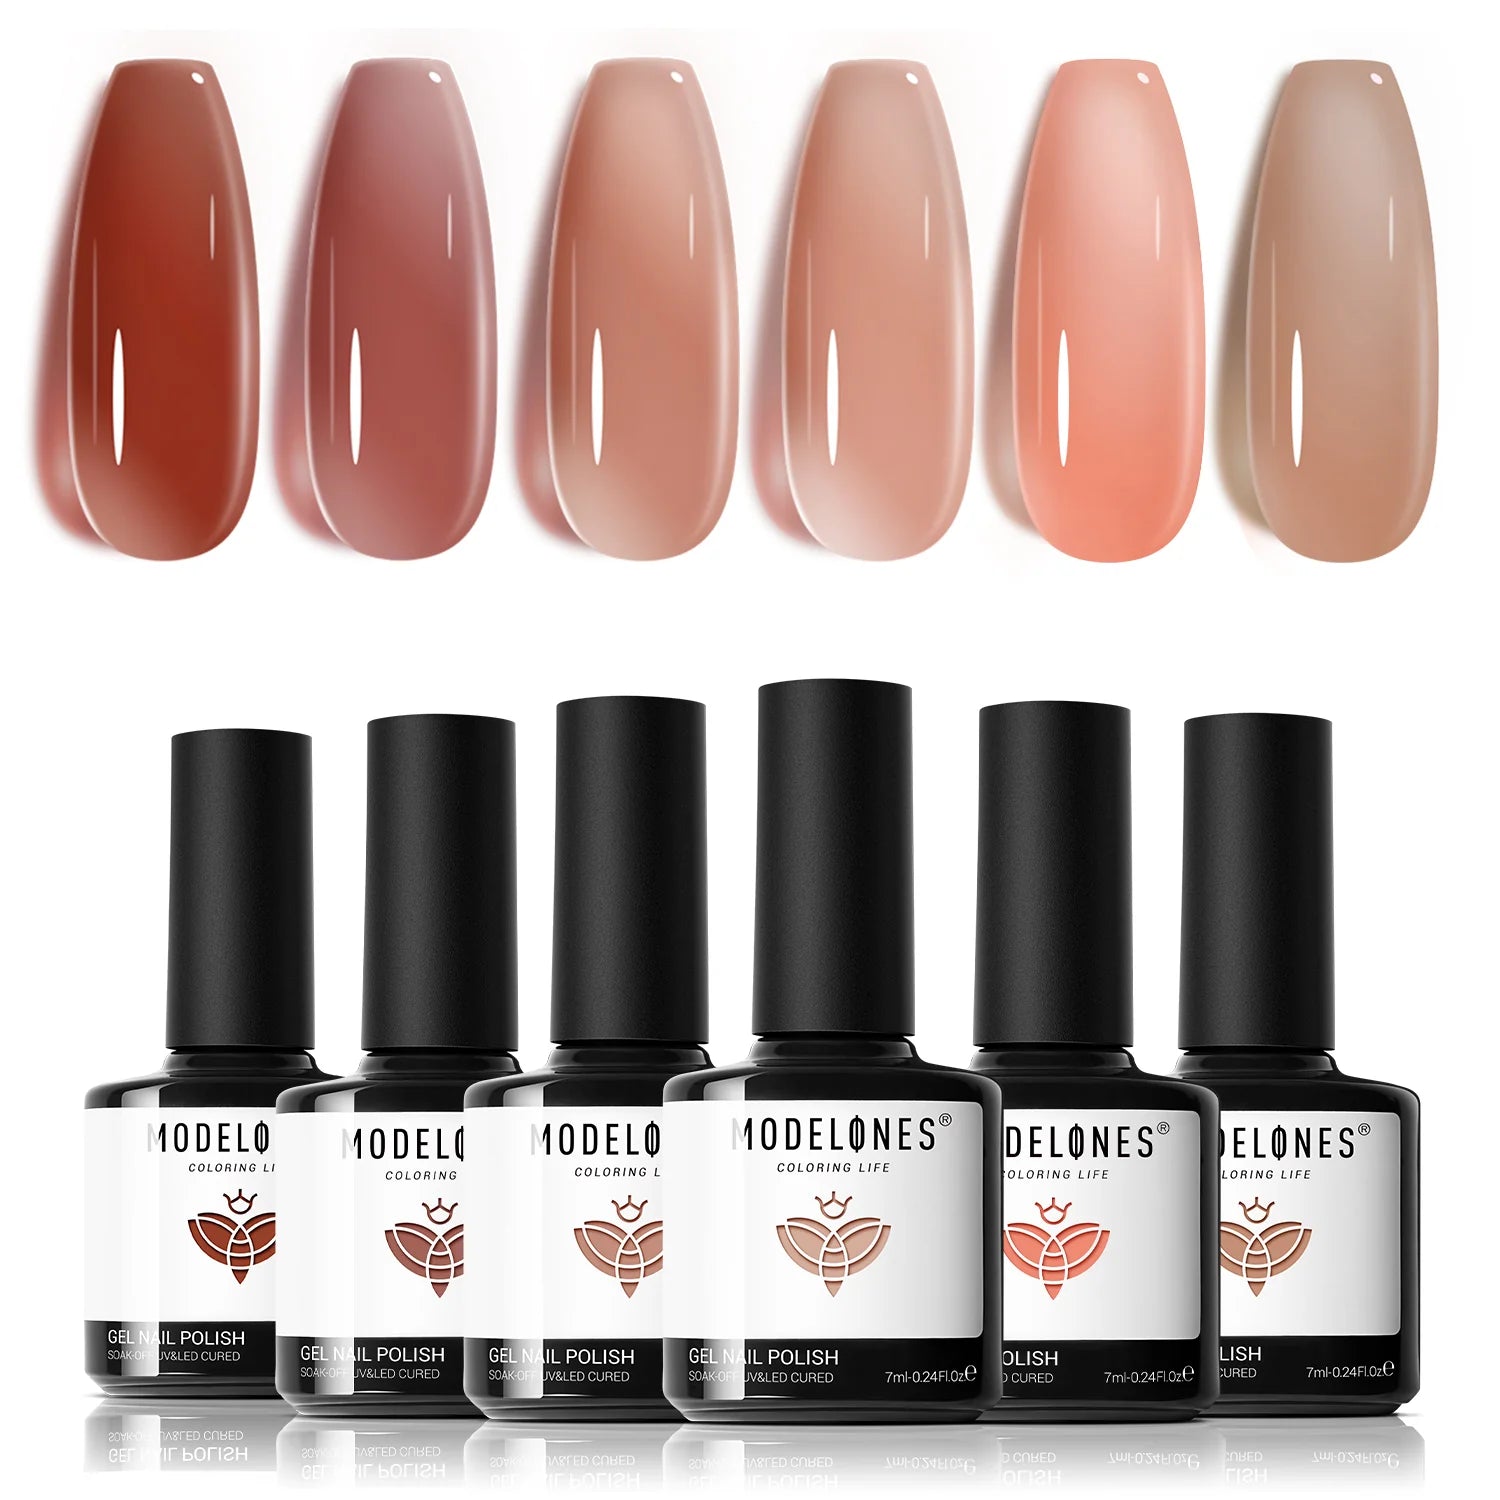 Jelly Sweetie - 6 Colors Gel Nail Polish Kit